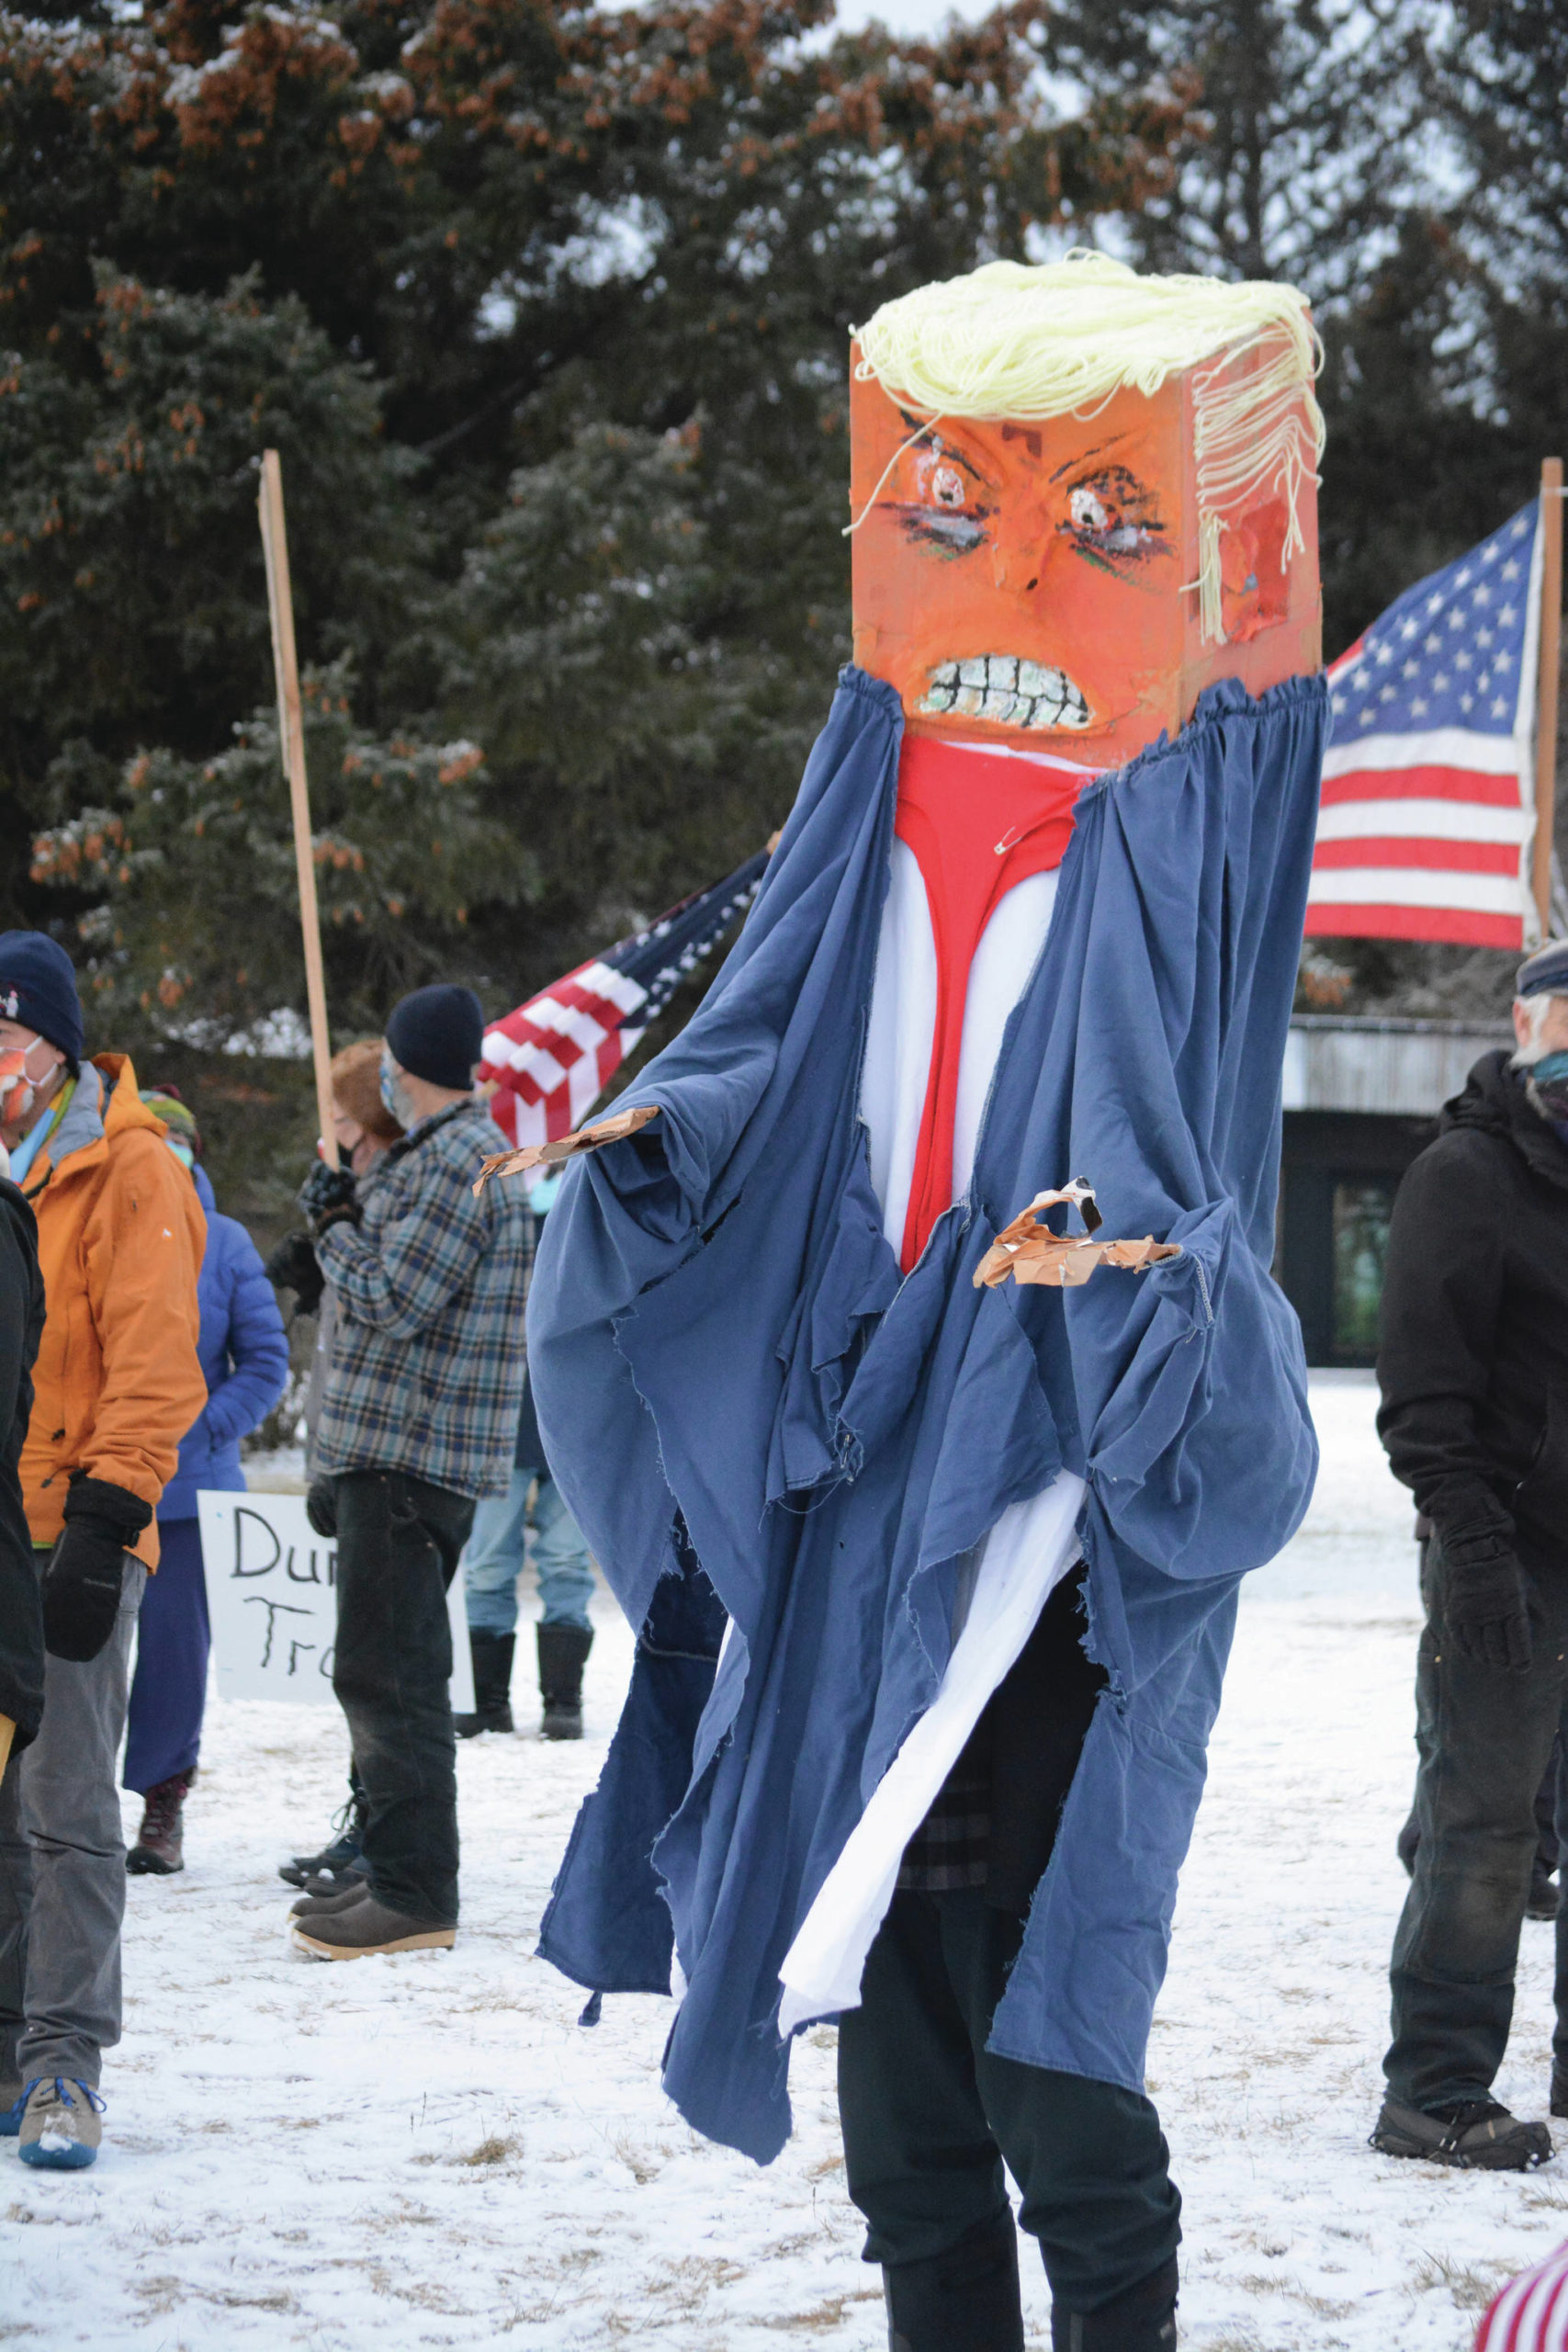 Charles Aguilar wears a President Donald Trump puppet at a protest against Trump on Saturday, Jan. 9, 2021, at WKFL Park in Homer, Alaska. He was part of about 50 people who reacted to the events of Jan. 6, 2021, in which rioters broke into the U.S. Capitol while Congress attempted to tally the Electoral College results in which former Vice President Joe Biden won the presidential election. (Photo by Michael Armstrong/Homer News)